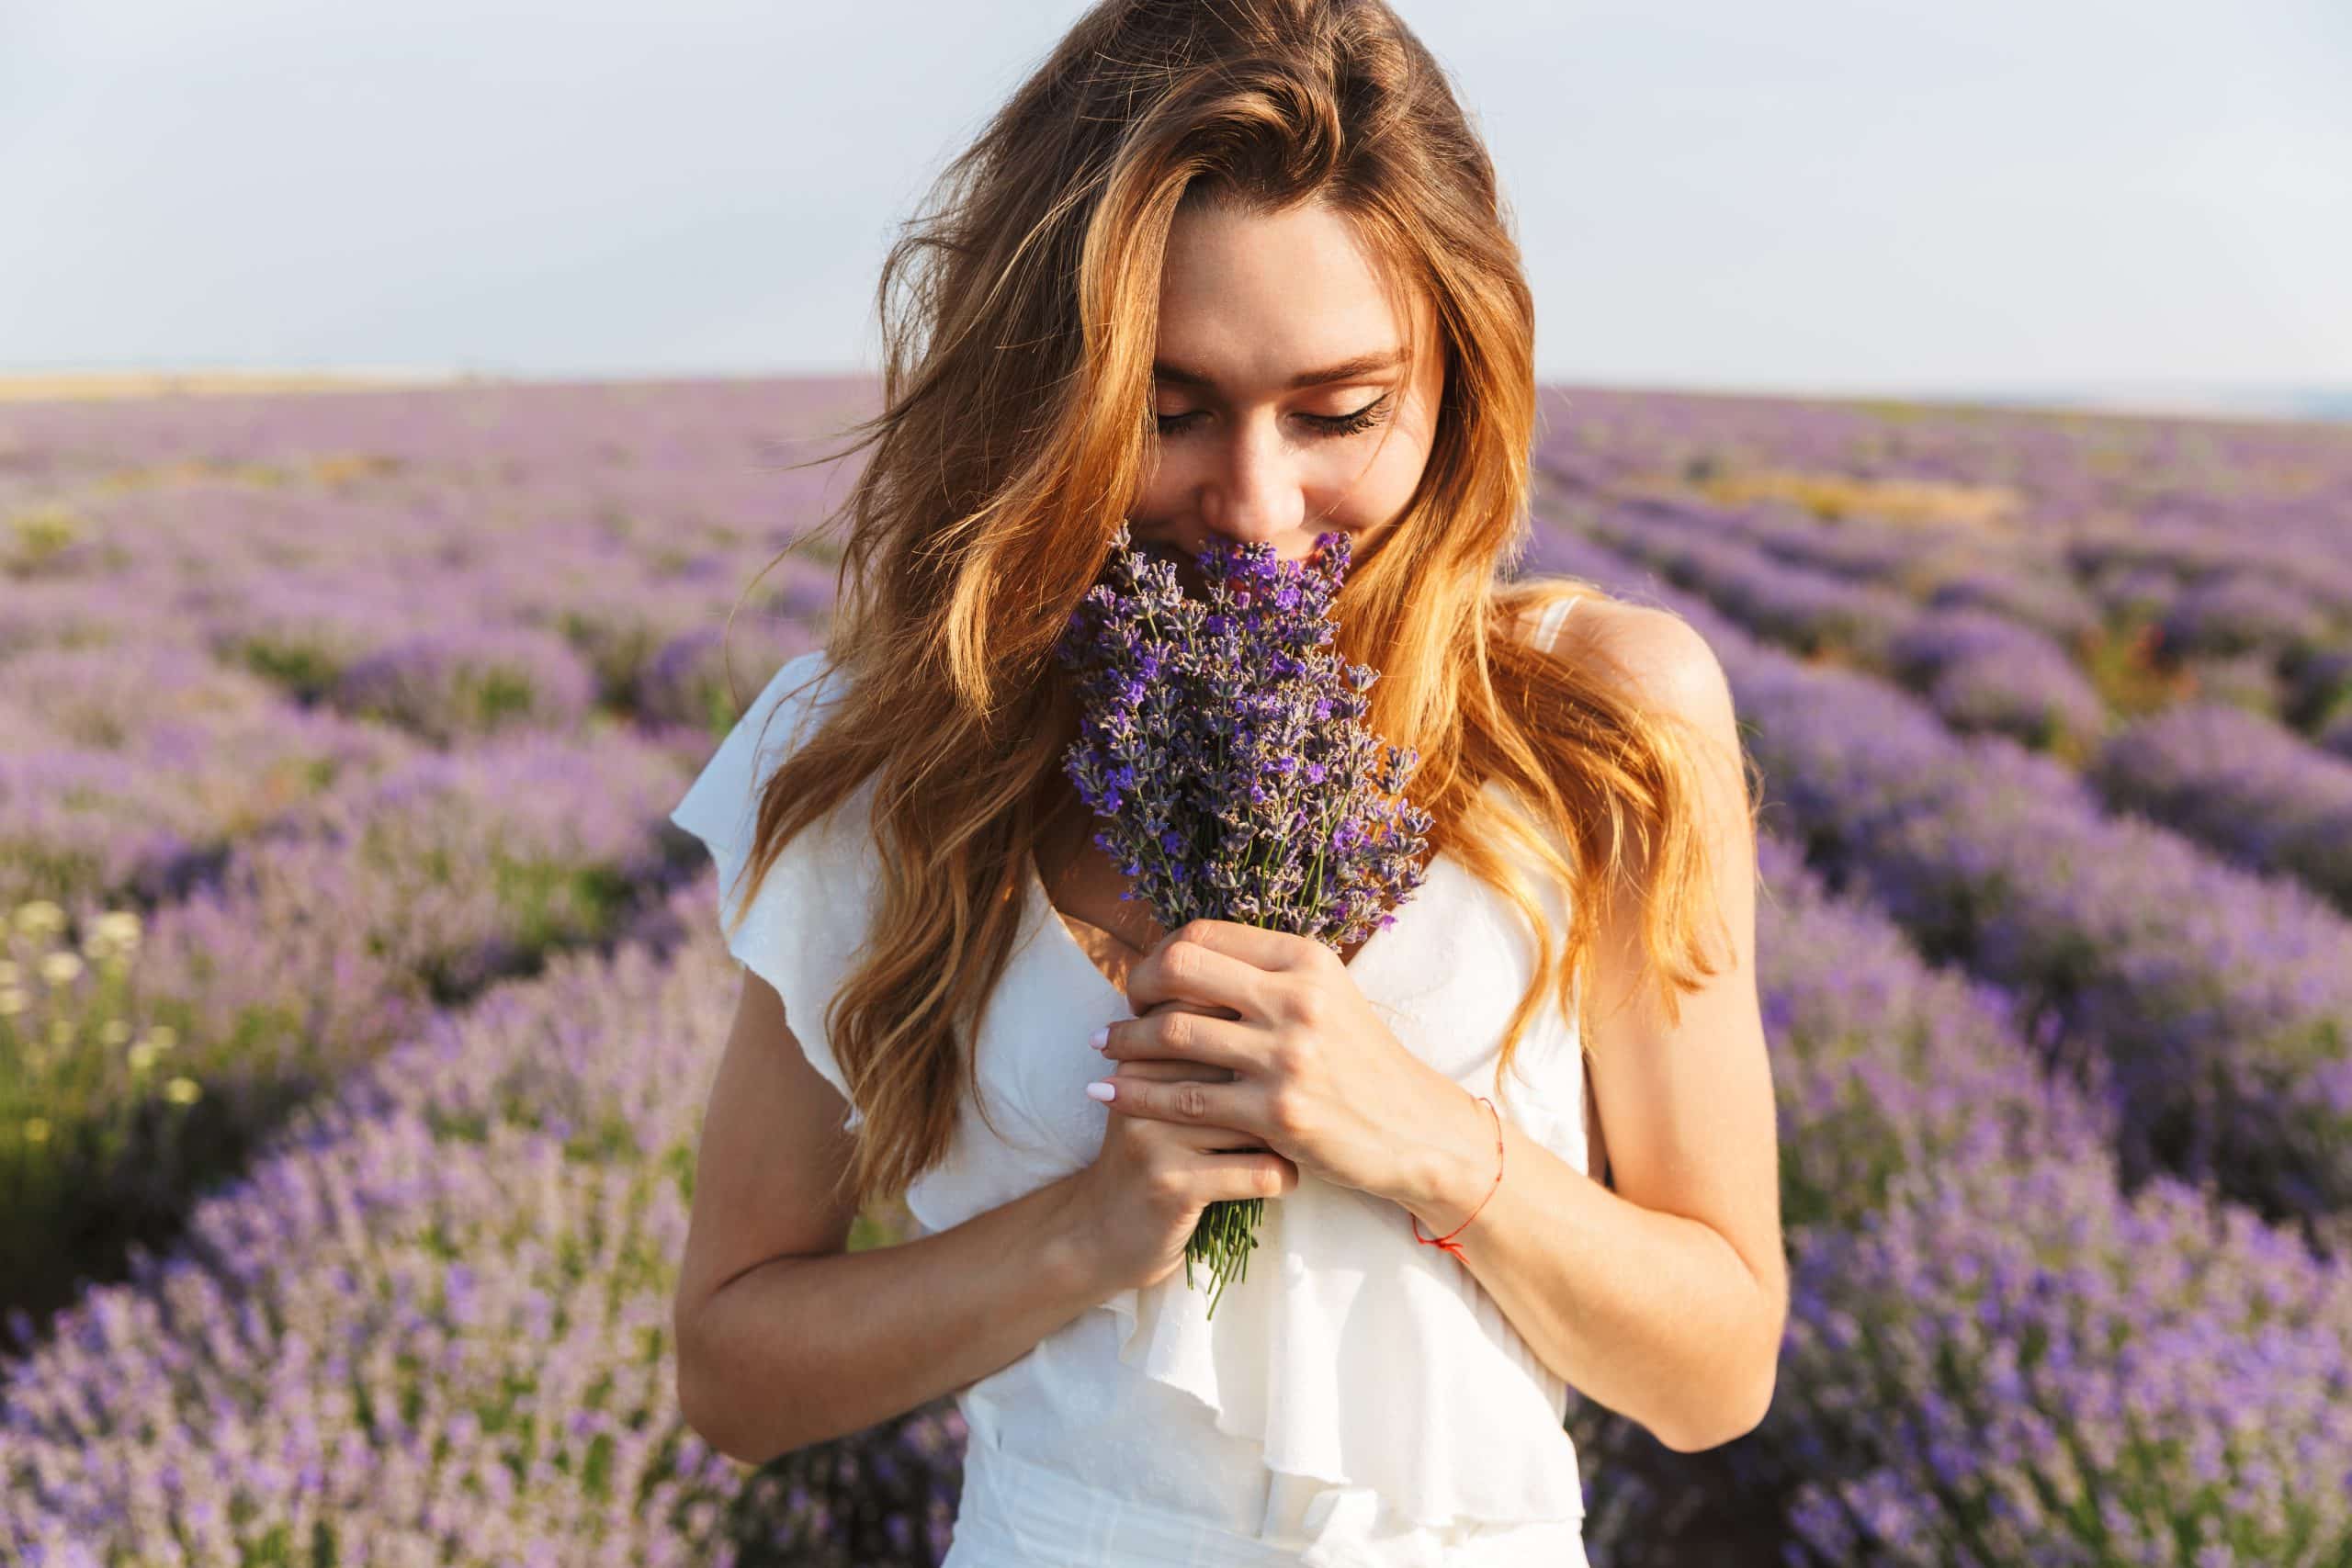 A young woman in a flower field holding a bouquet up to her nose to smell it.